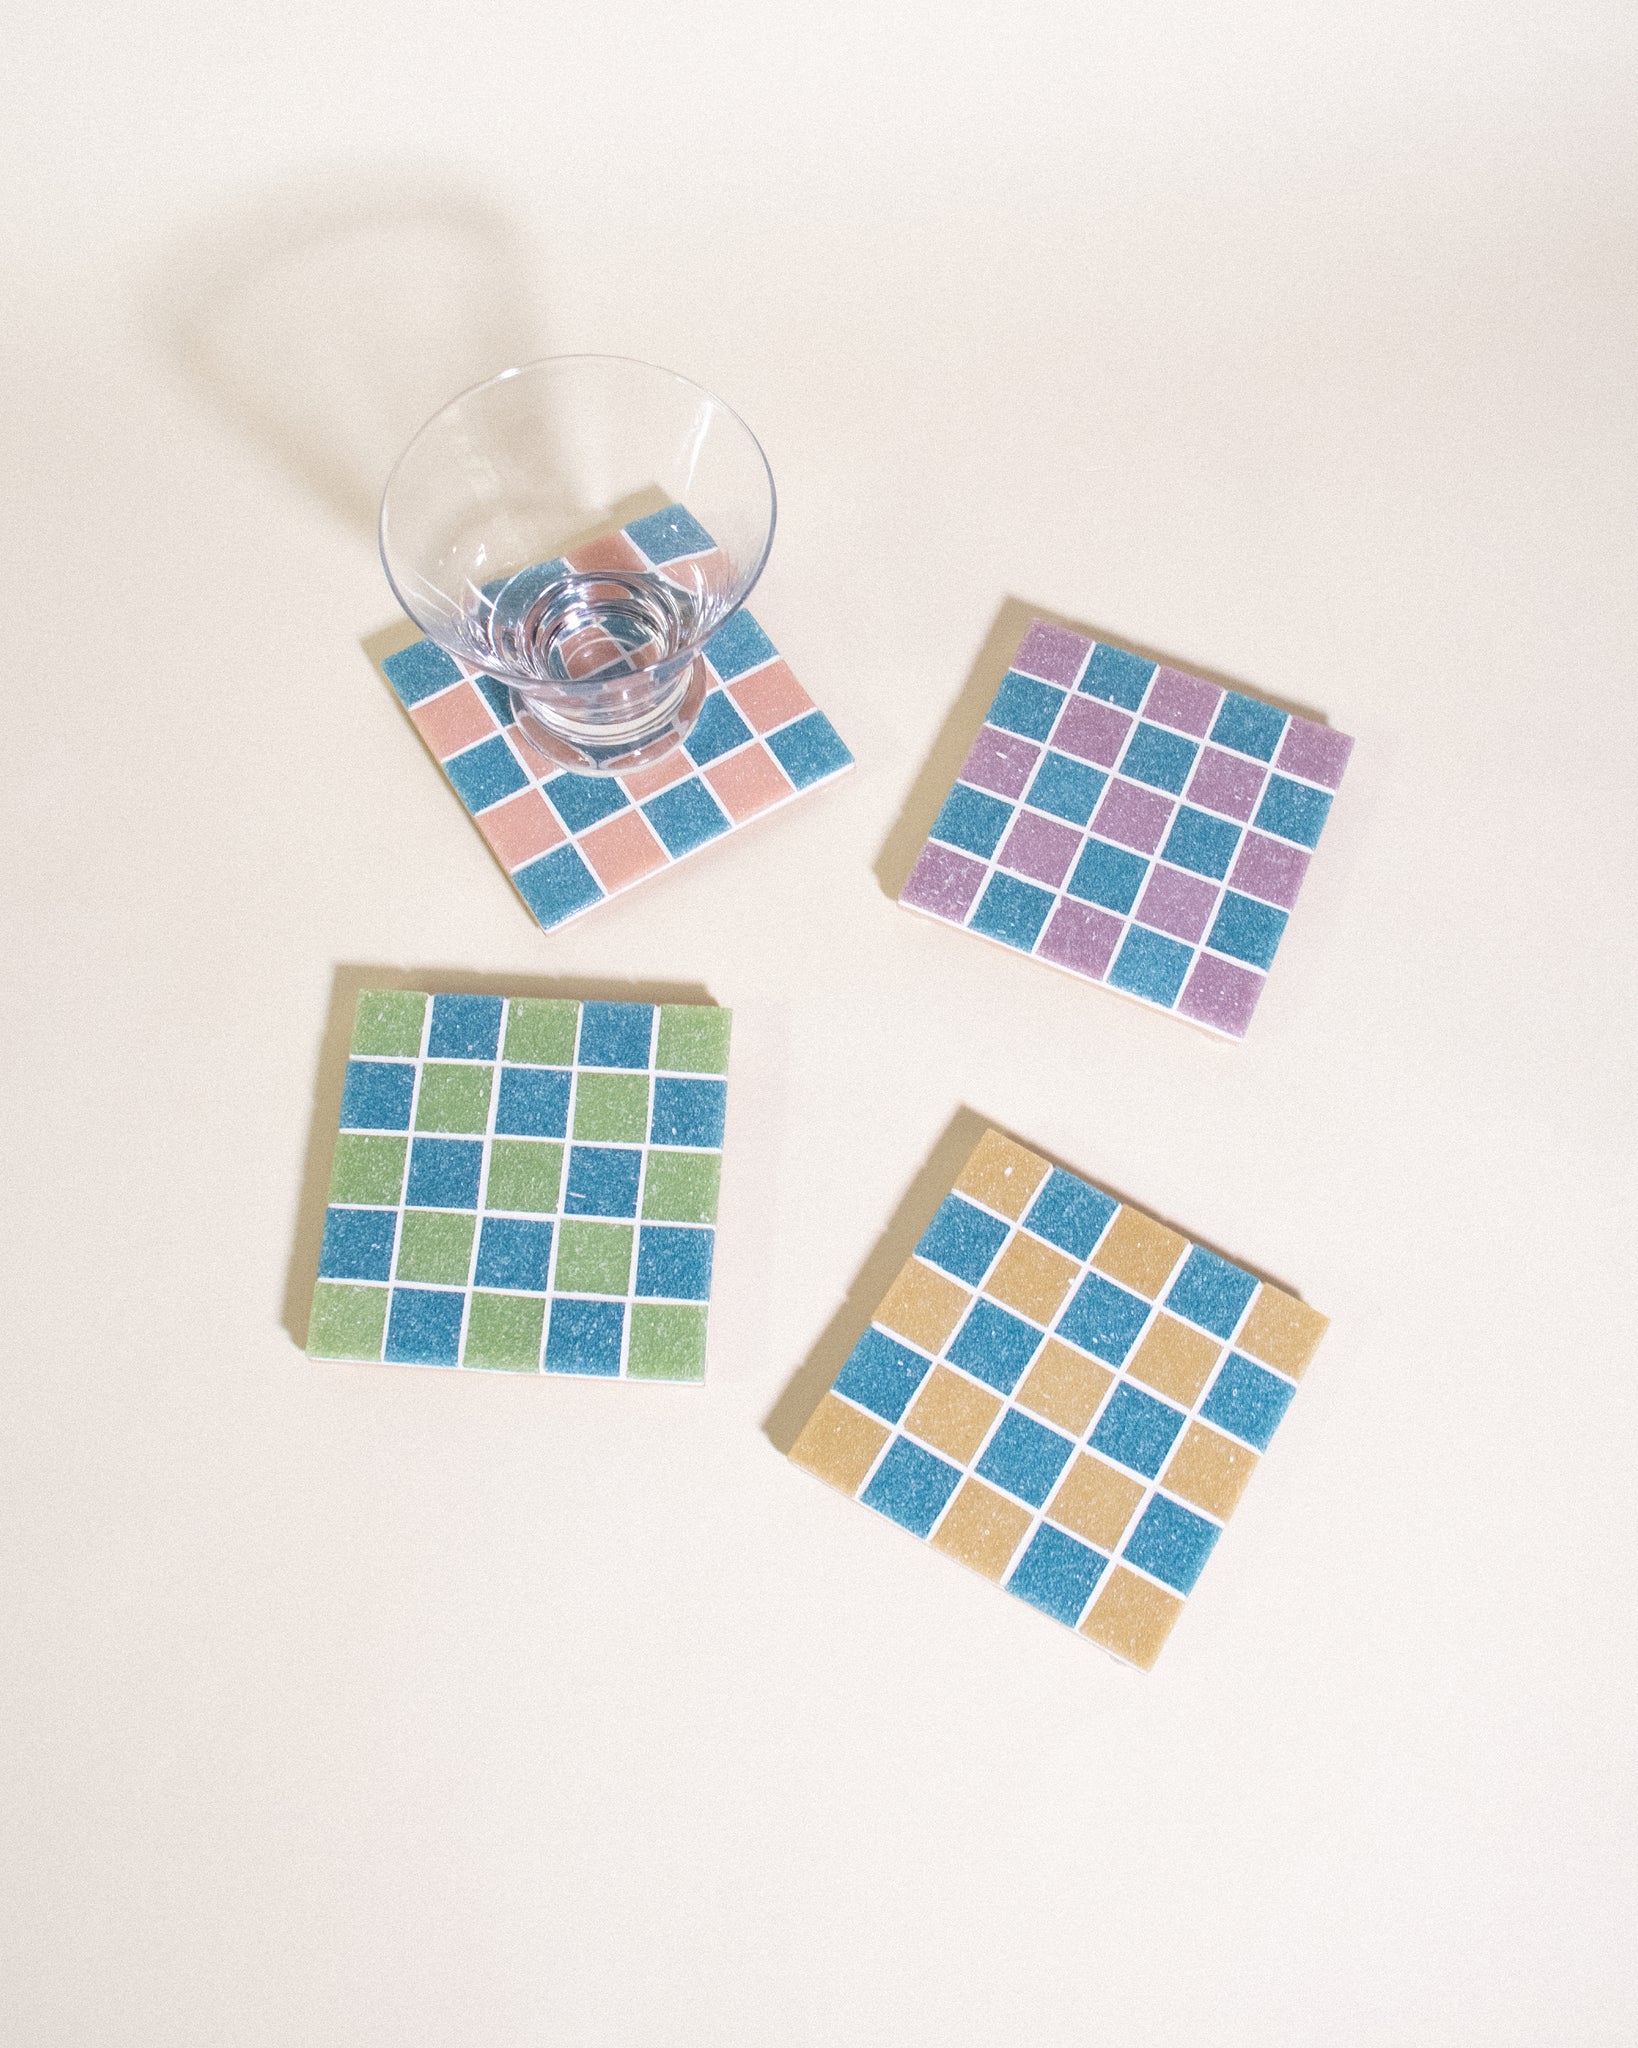 GLASS TILE COASTER - Sour Patch Candy - 07